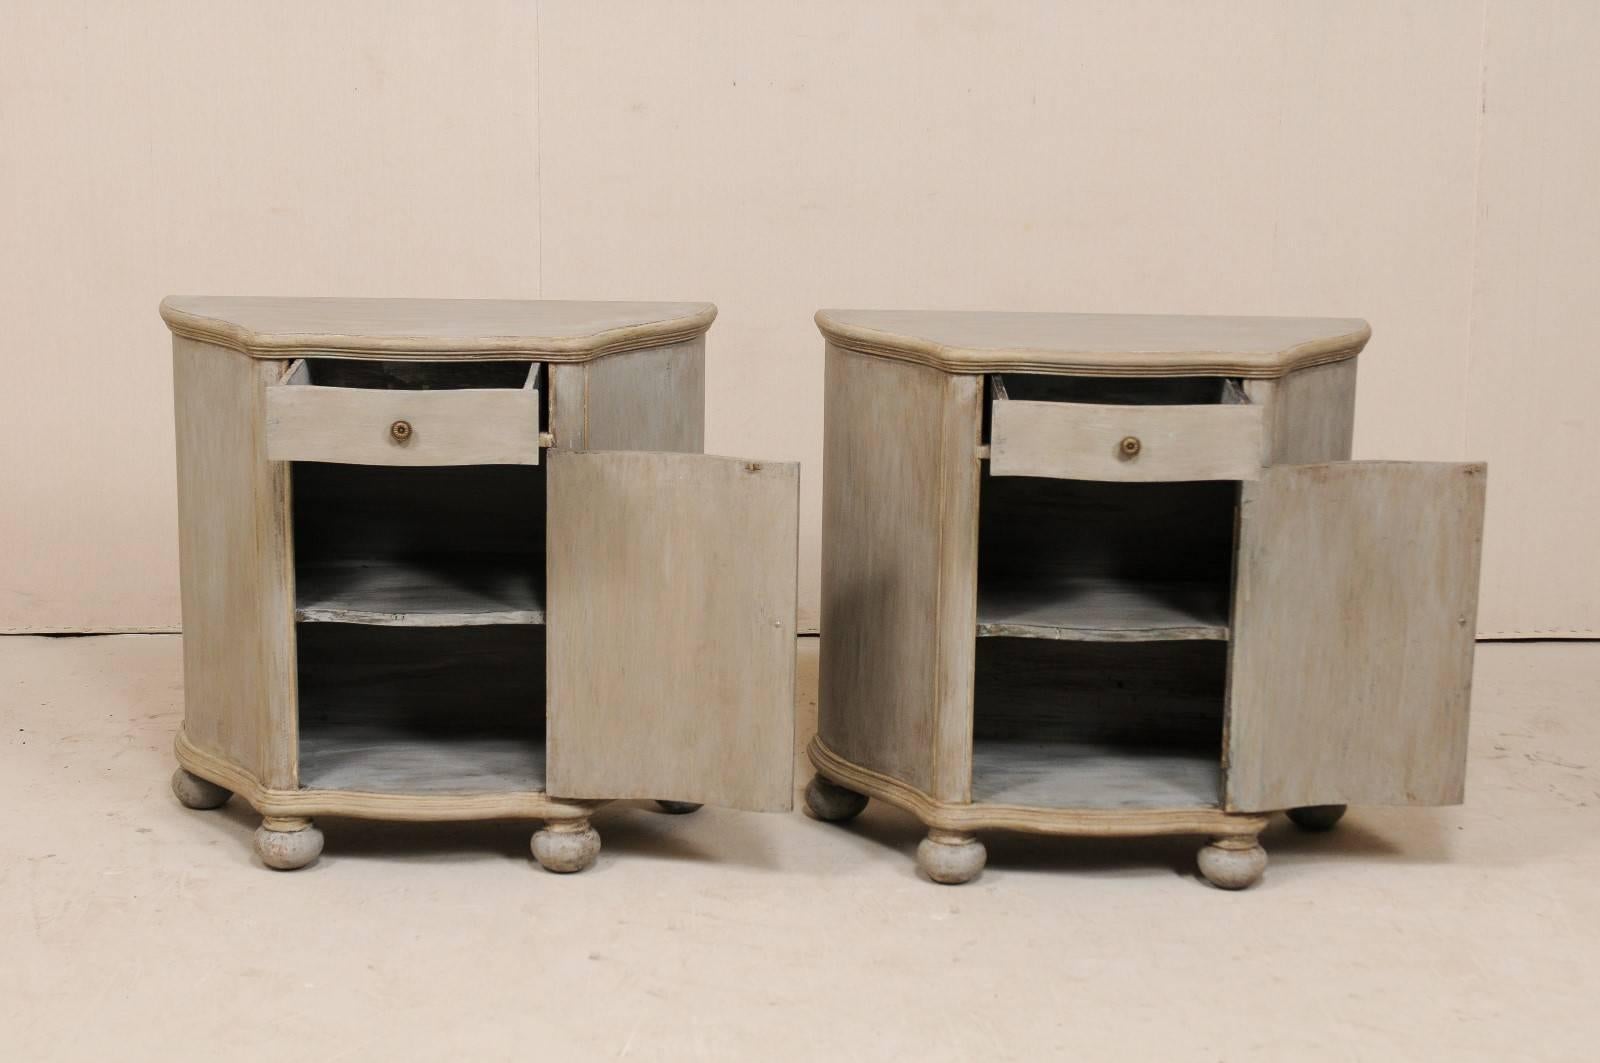 Pair of Vintage Painted Wood Demi-Styled Cabinets on Rounded Bun Feet 2